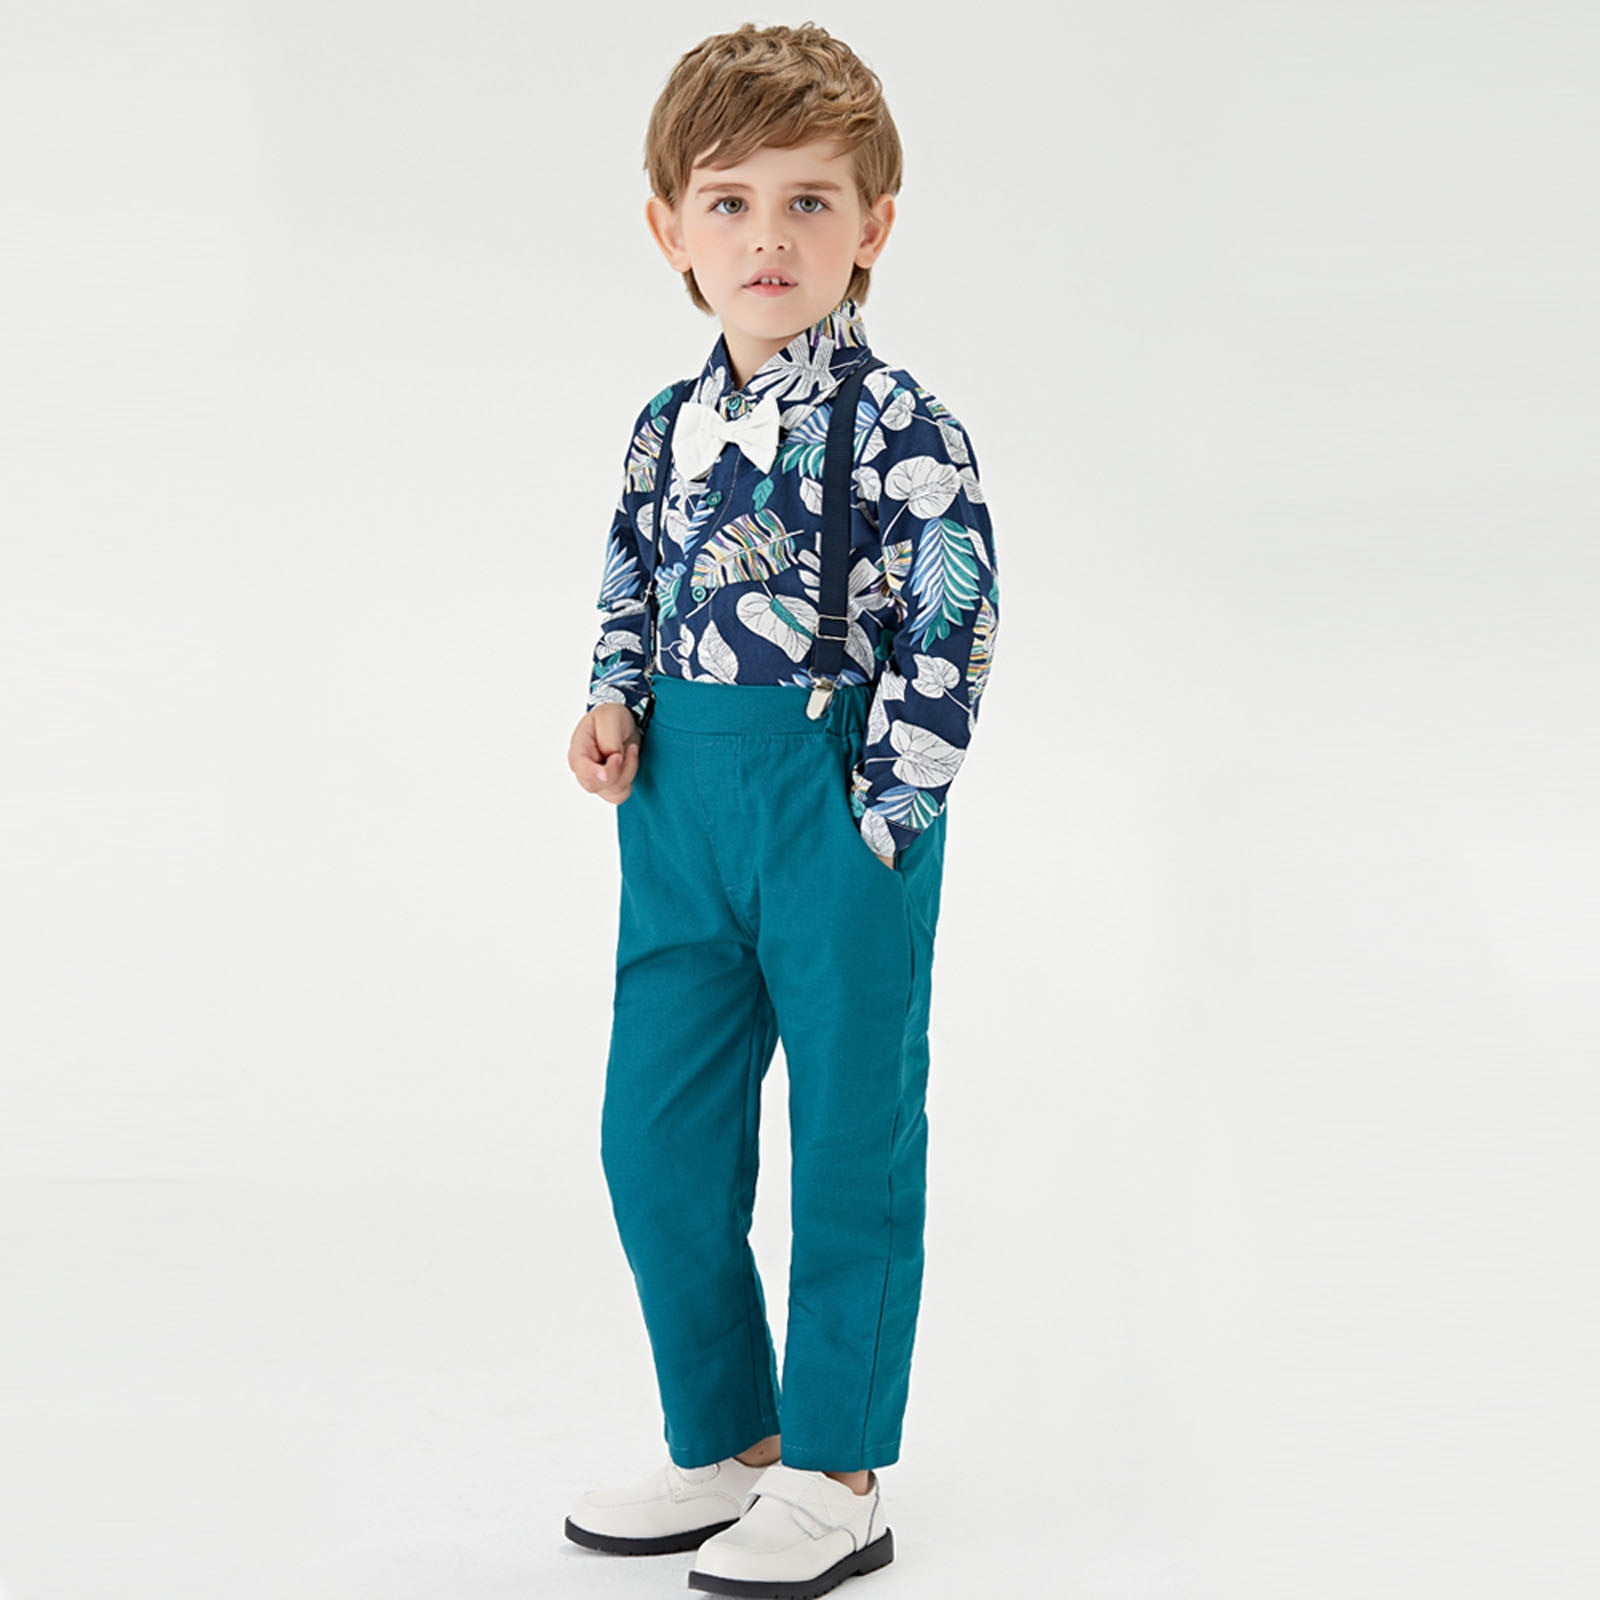 Favoffer Baby Boy Clothes Wedding Outfit Suits Floral Print Shirt ...